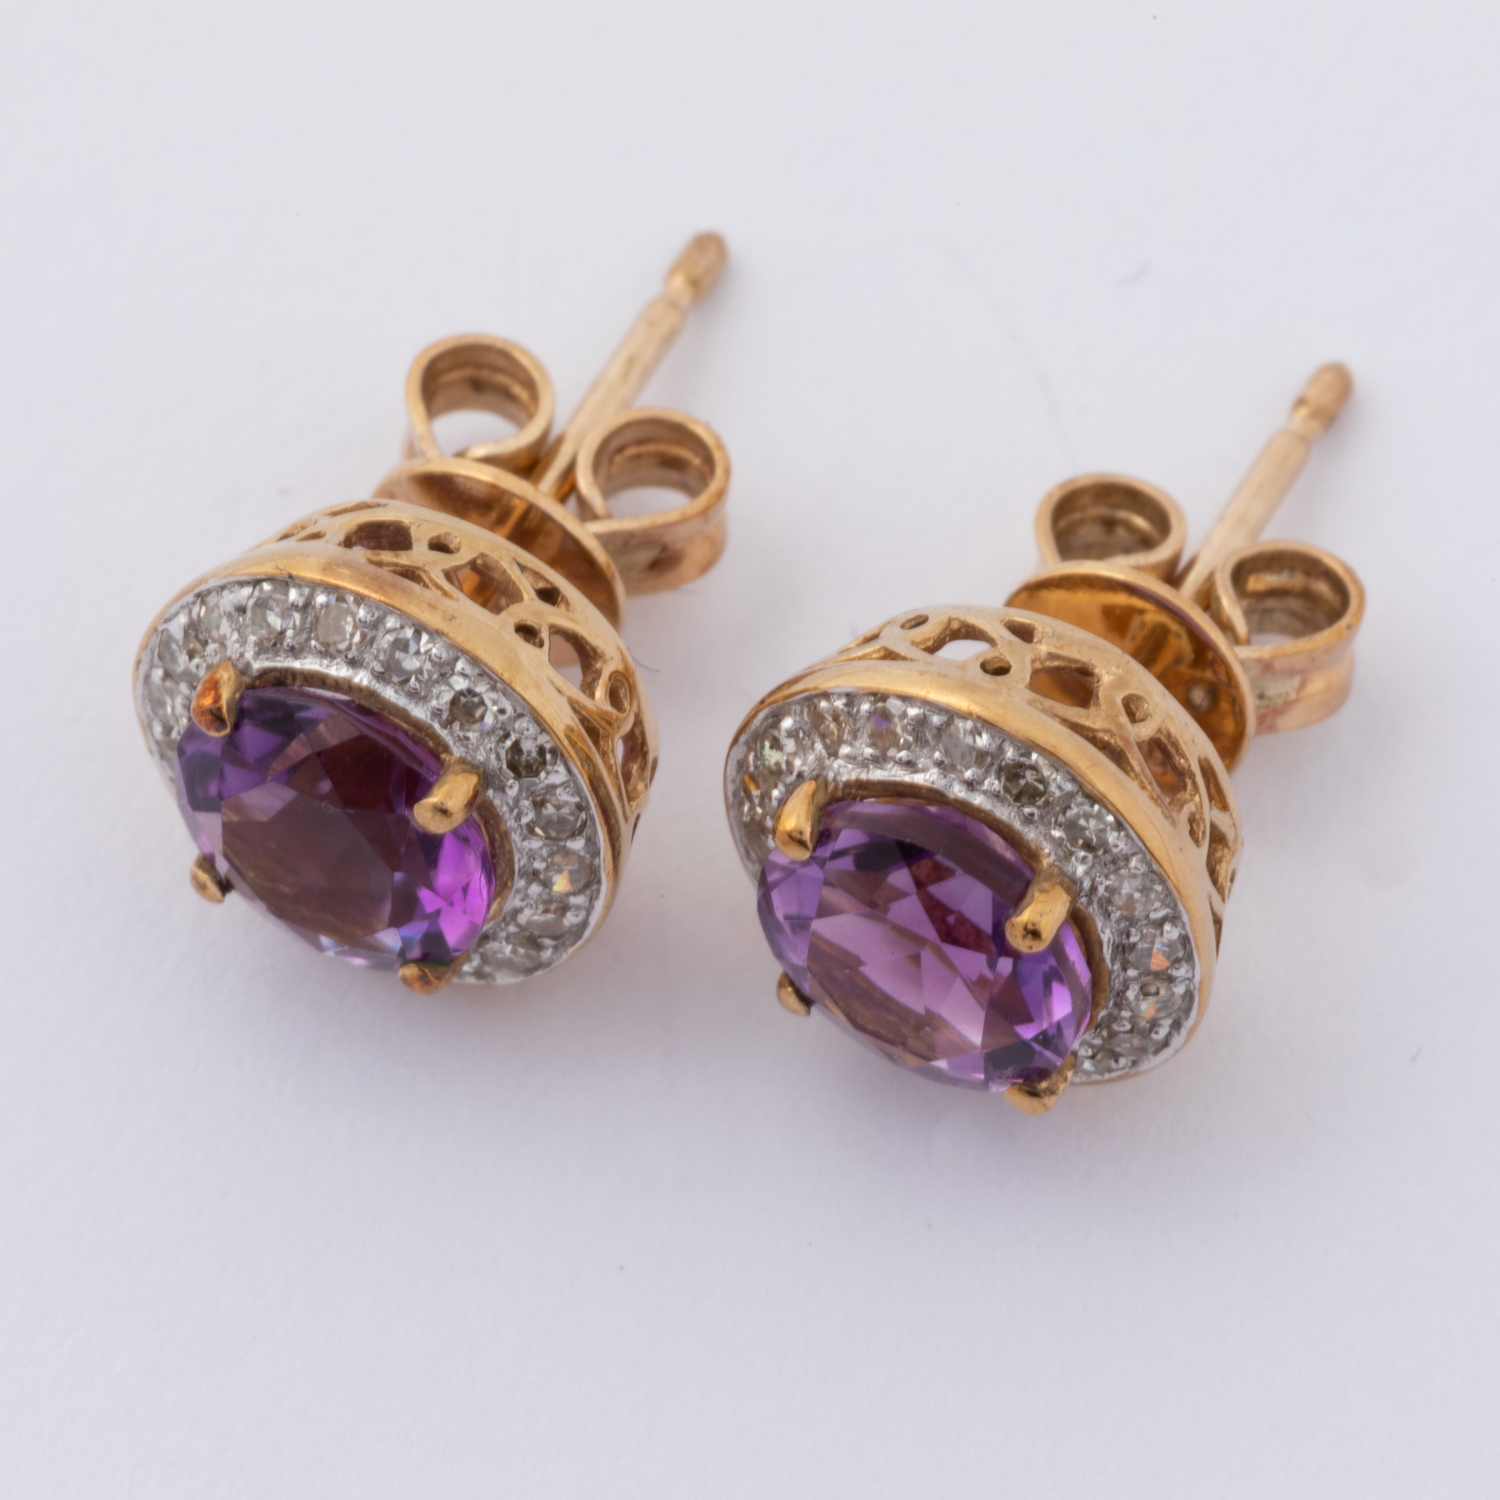 A pair of 9ct yellow gold stud earrings set with a round cut amethyst and surrounded by small - Image 2 of 2